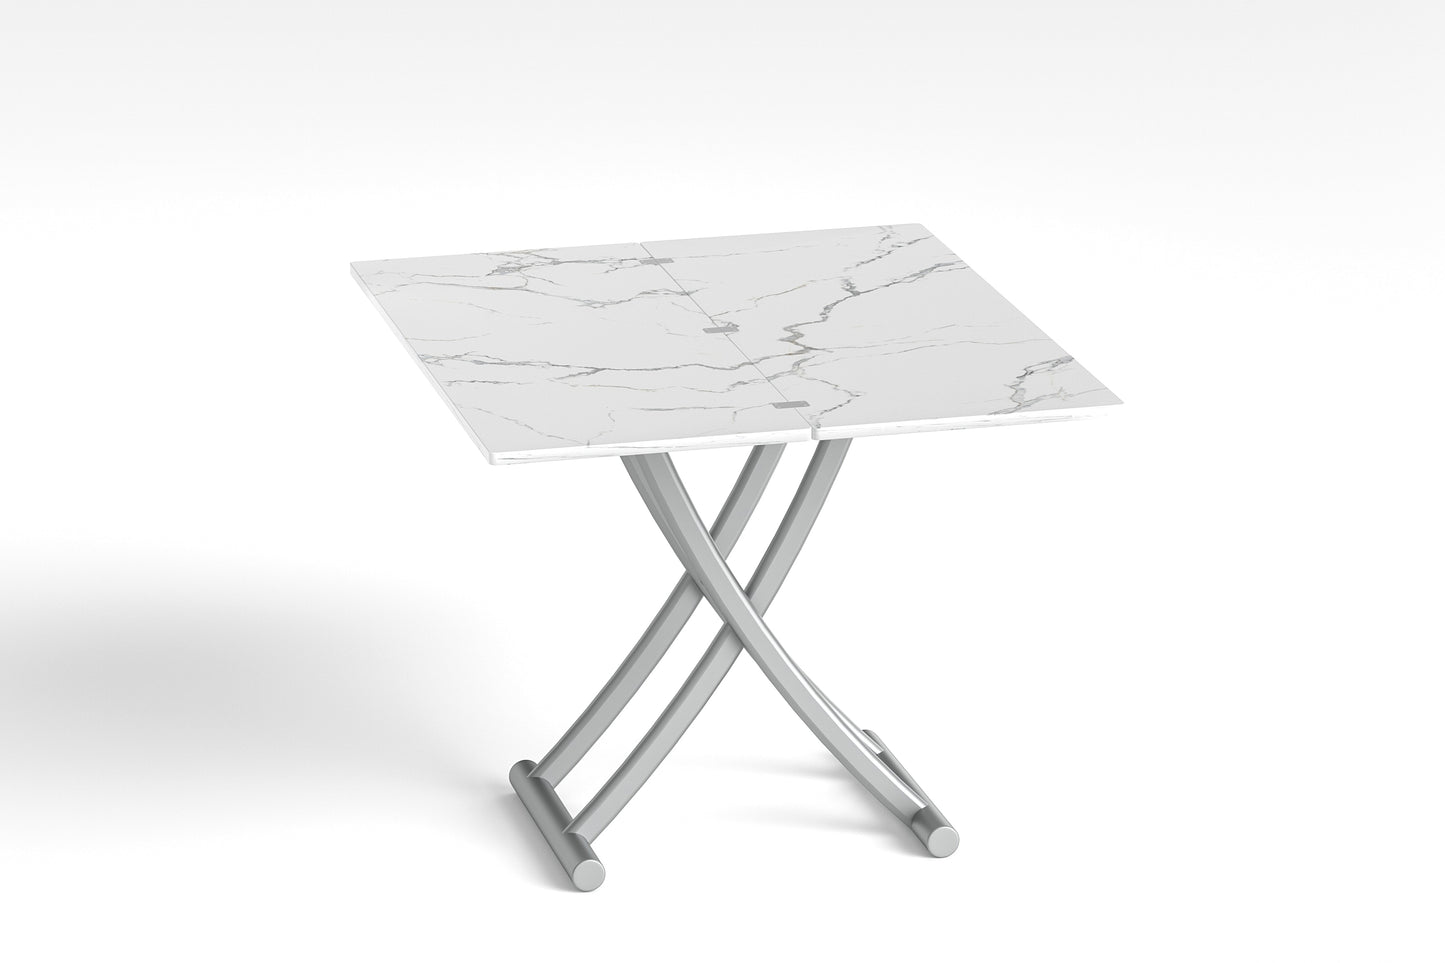 White Transforming table, Expandable Coffee Table, Space-Saving Table, dinning table mode (left side view)